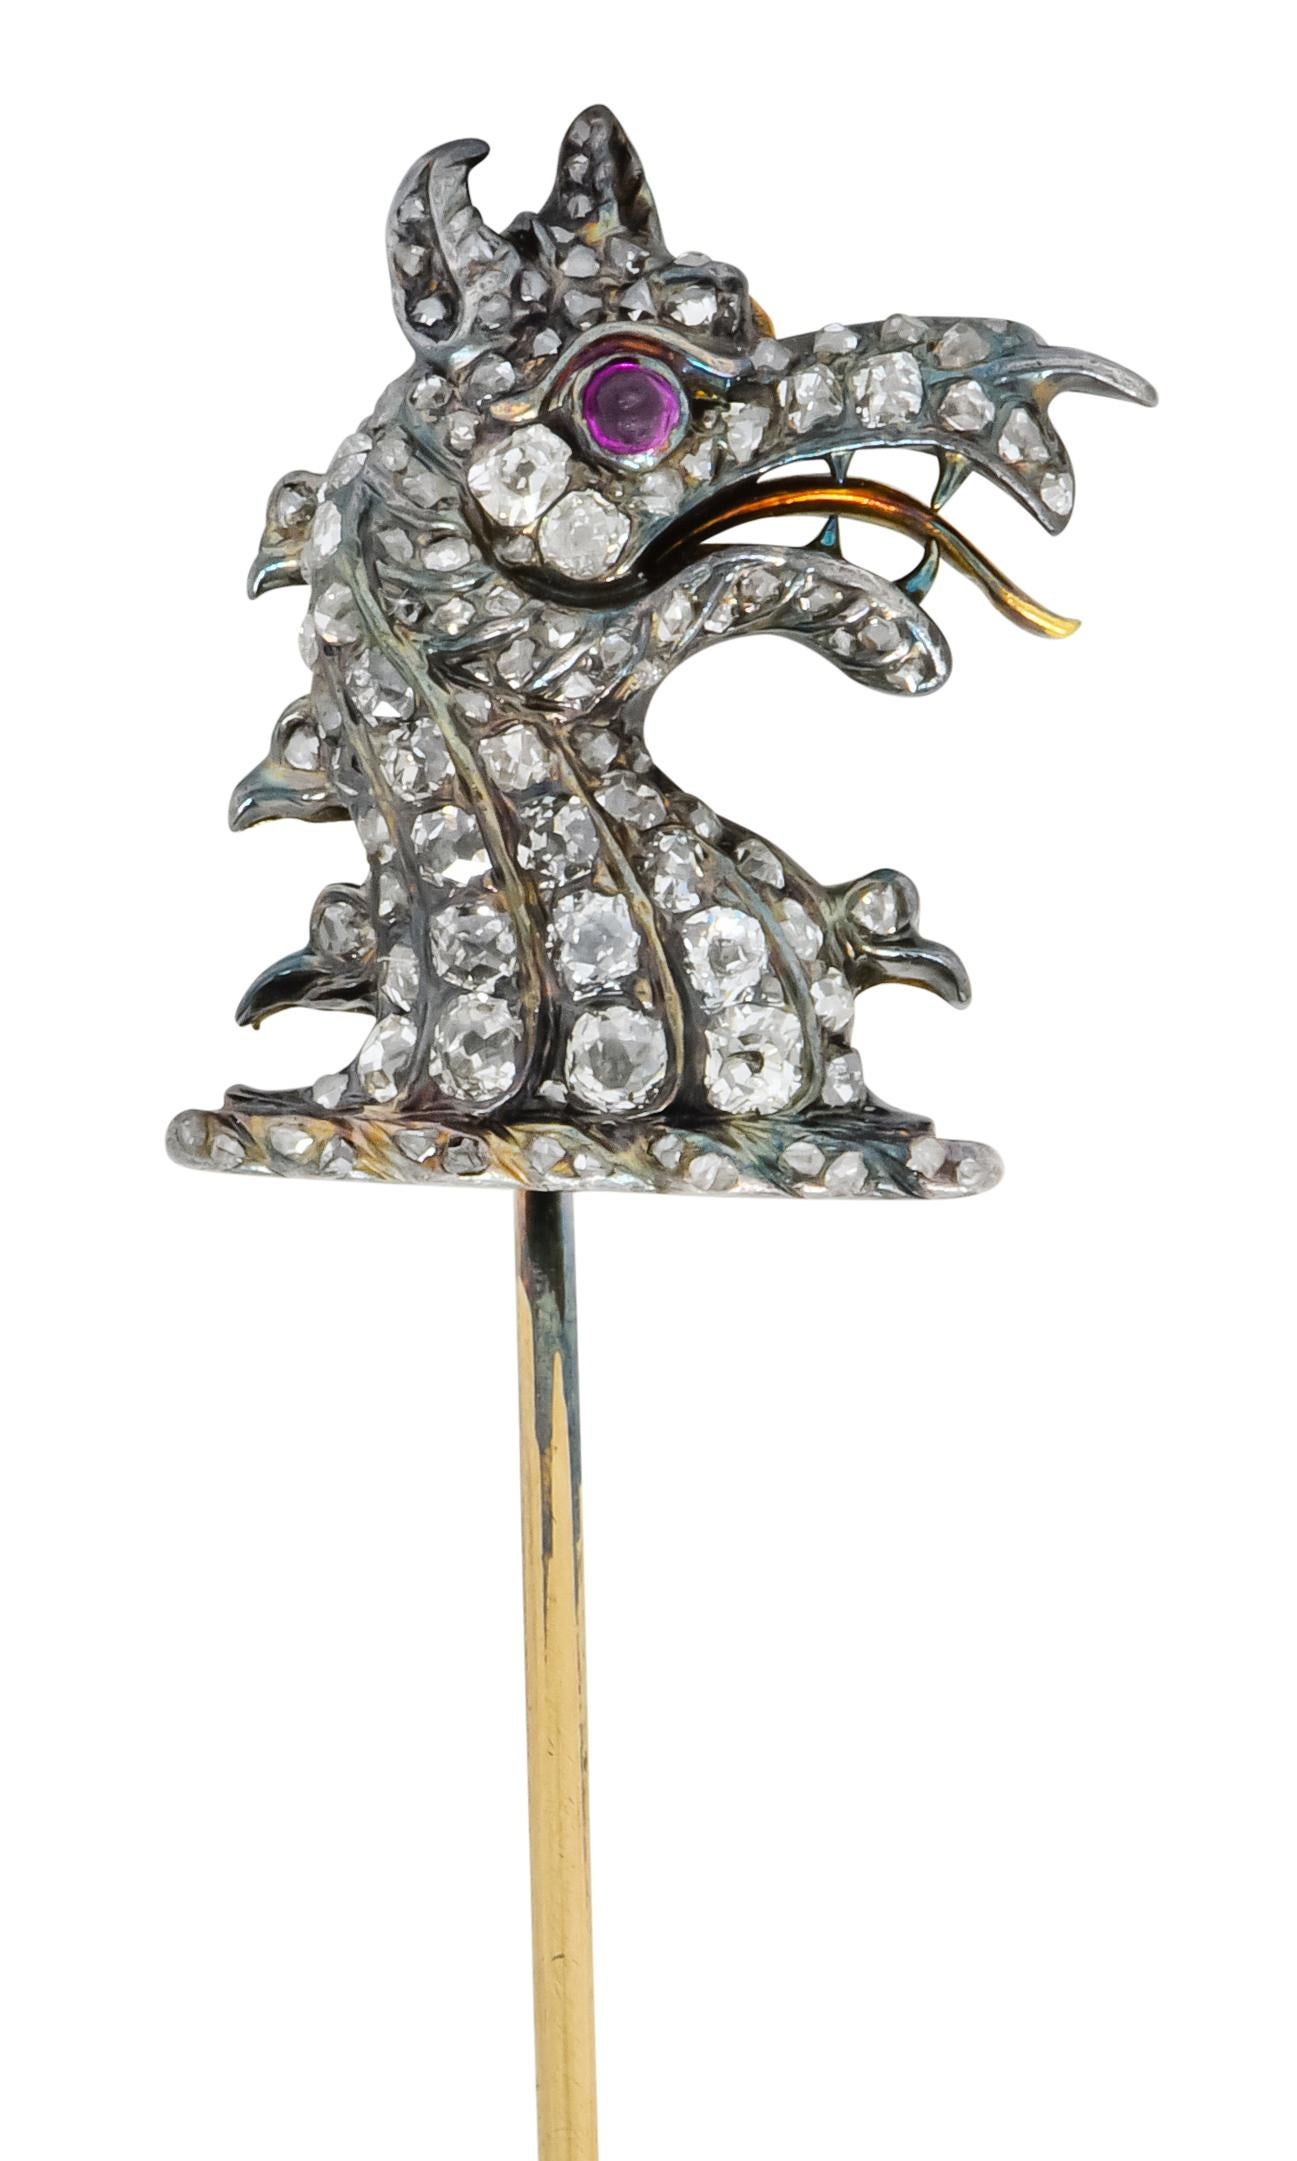 Depicting a ferocious dragon with a round ruby cabochon eye and mouth agape bearing sharp teeth and a reptilian tongue

Bead set throughout by rose cut diamonds within ridged channels imitating scaled skin

Tested as silver-topped 14 karat